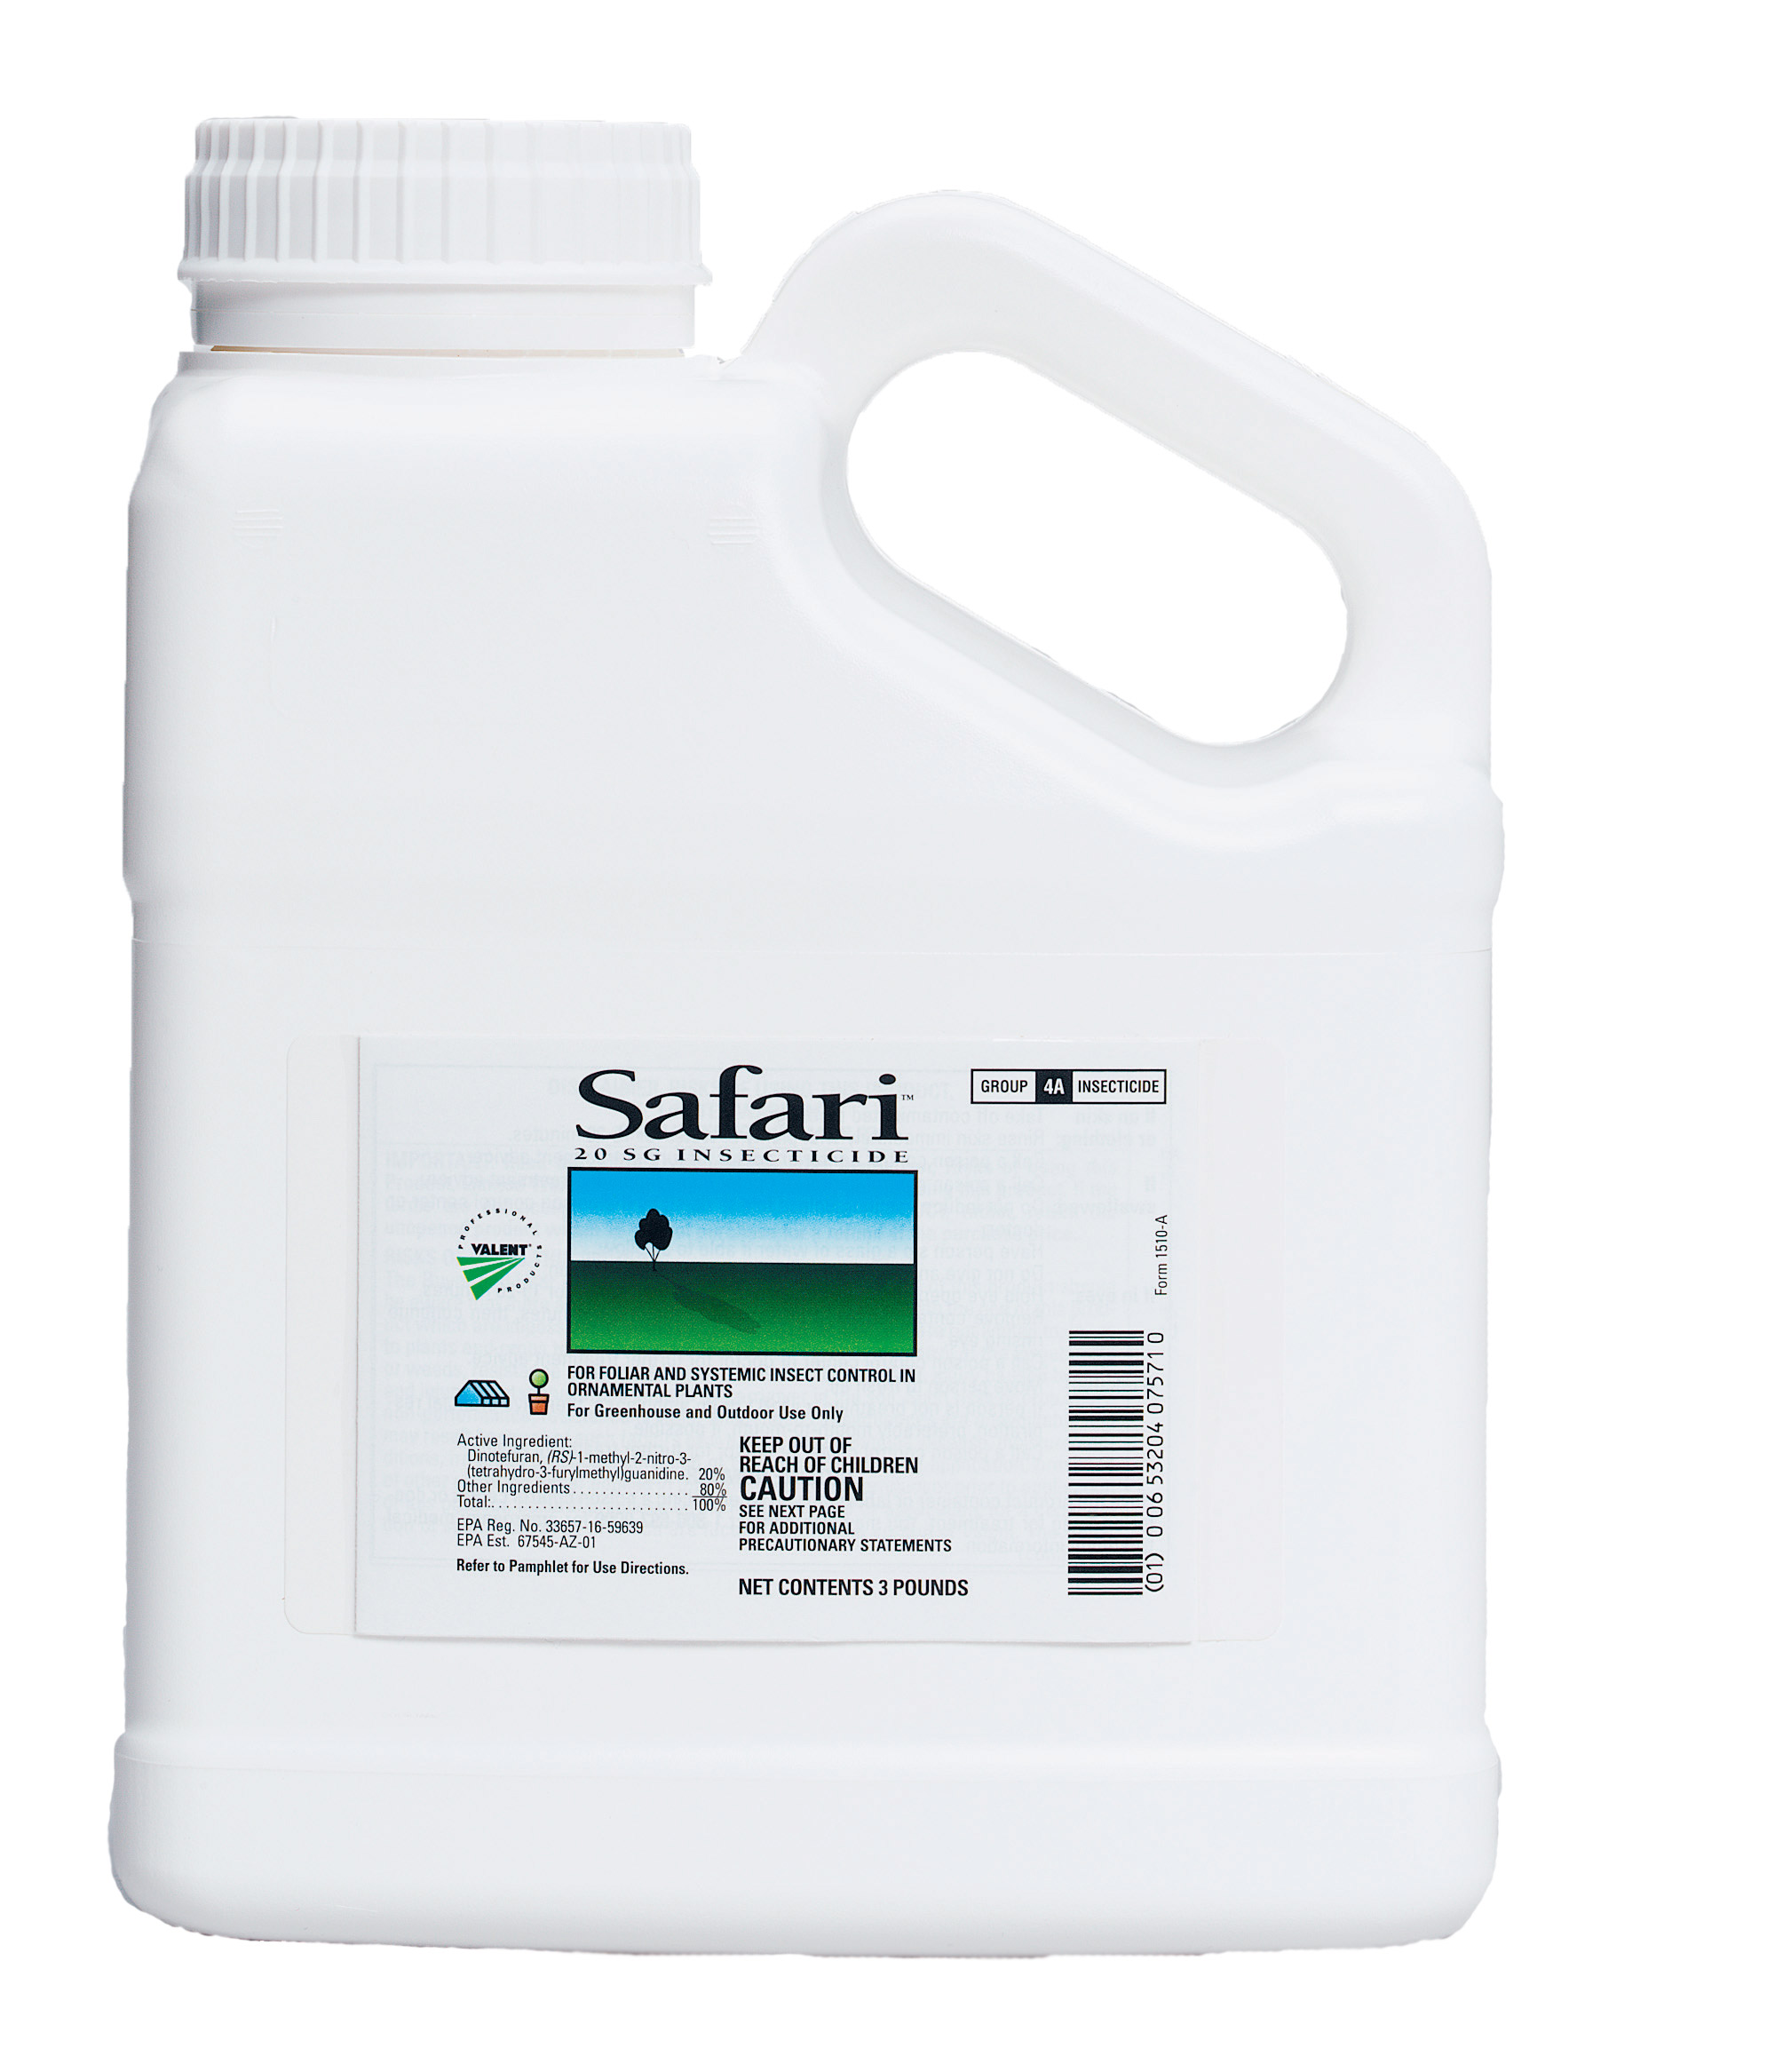 Safari 20 SG Insecticide 3 lb Bottle 4/cs - Insecticides